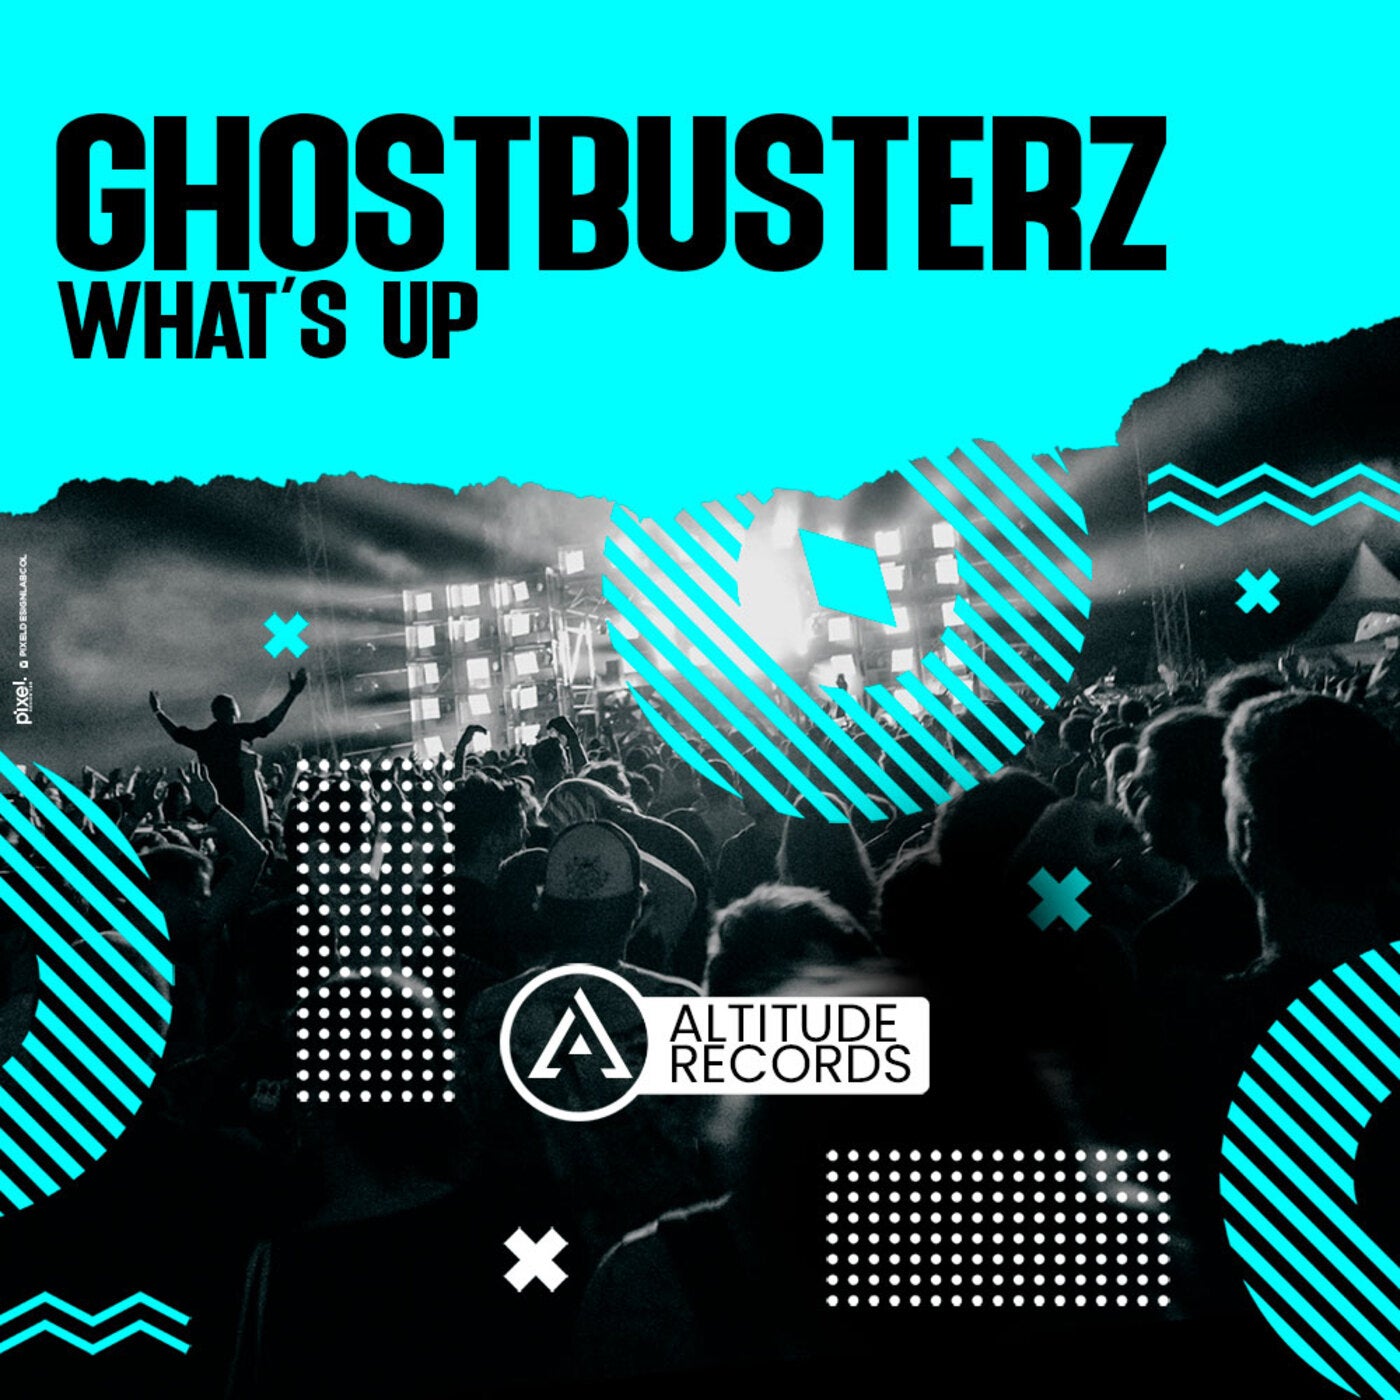 Ghostbusterz - What's Up (Original Mix)